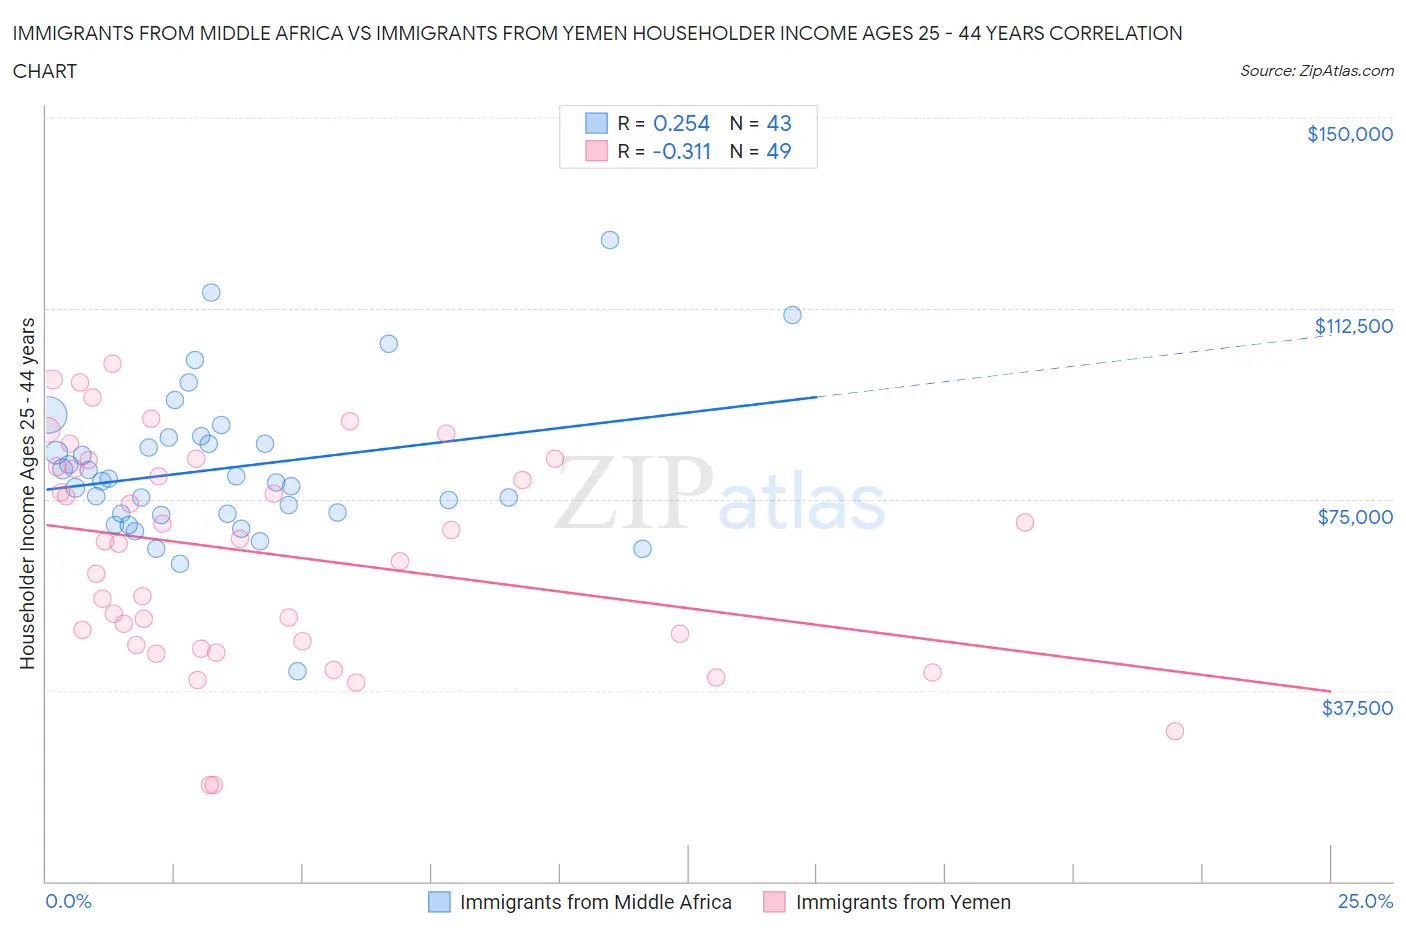 Immigrants from Middle Africa vs Immigrants from Yemen Householder Income Ages 25 - 44 years